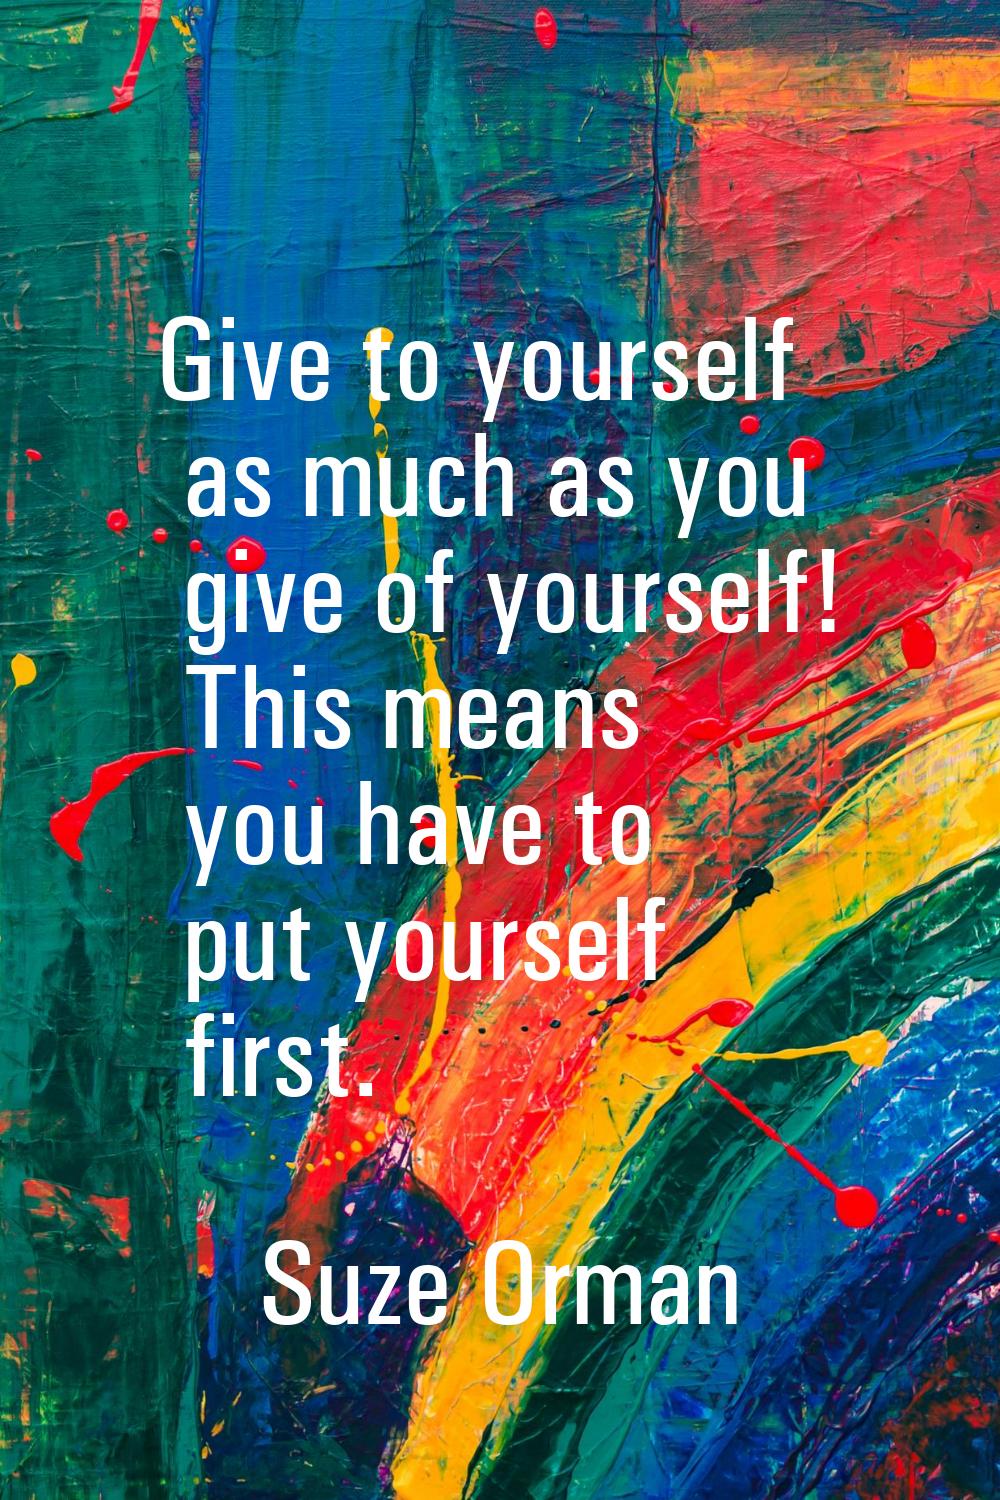 Give to yourself as much as you give of yourself! This means you have to put yourself first.